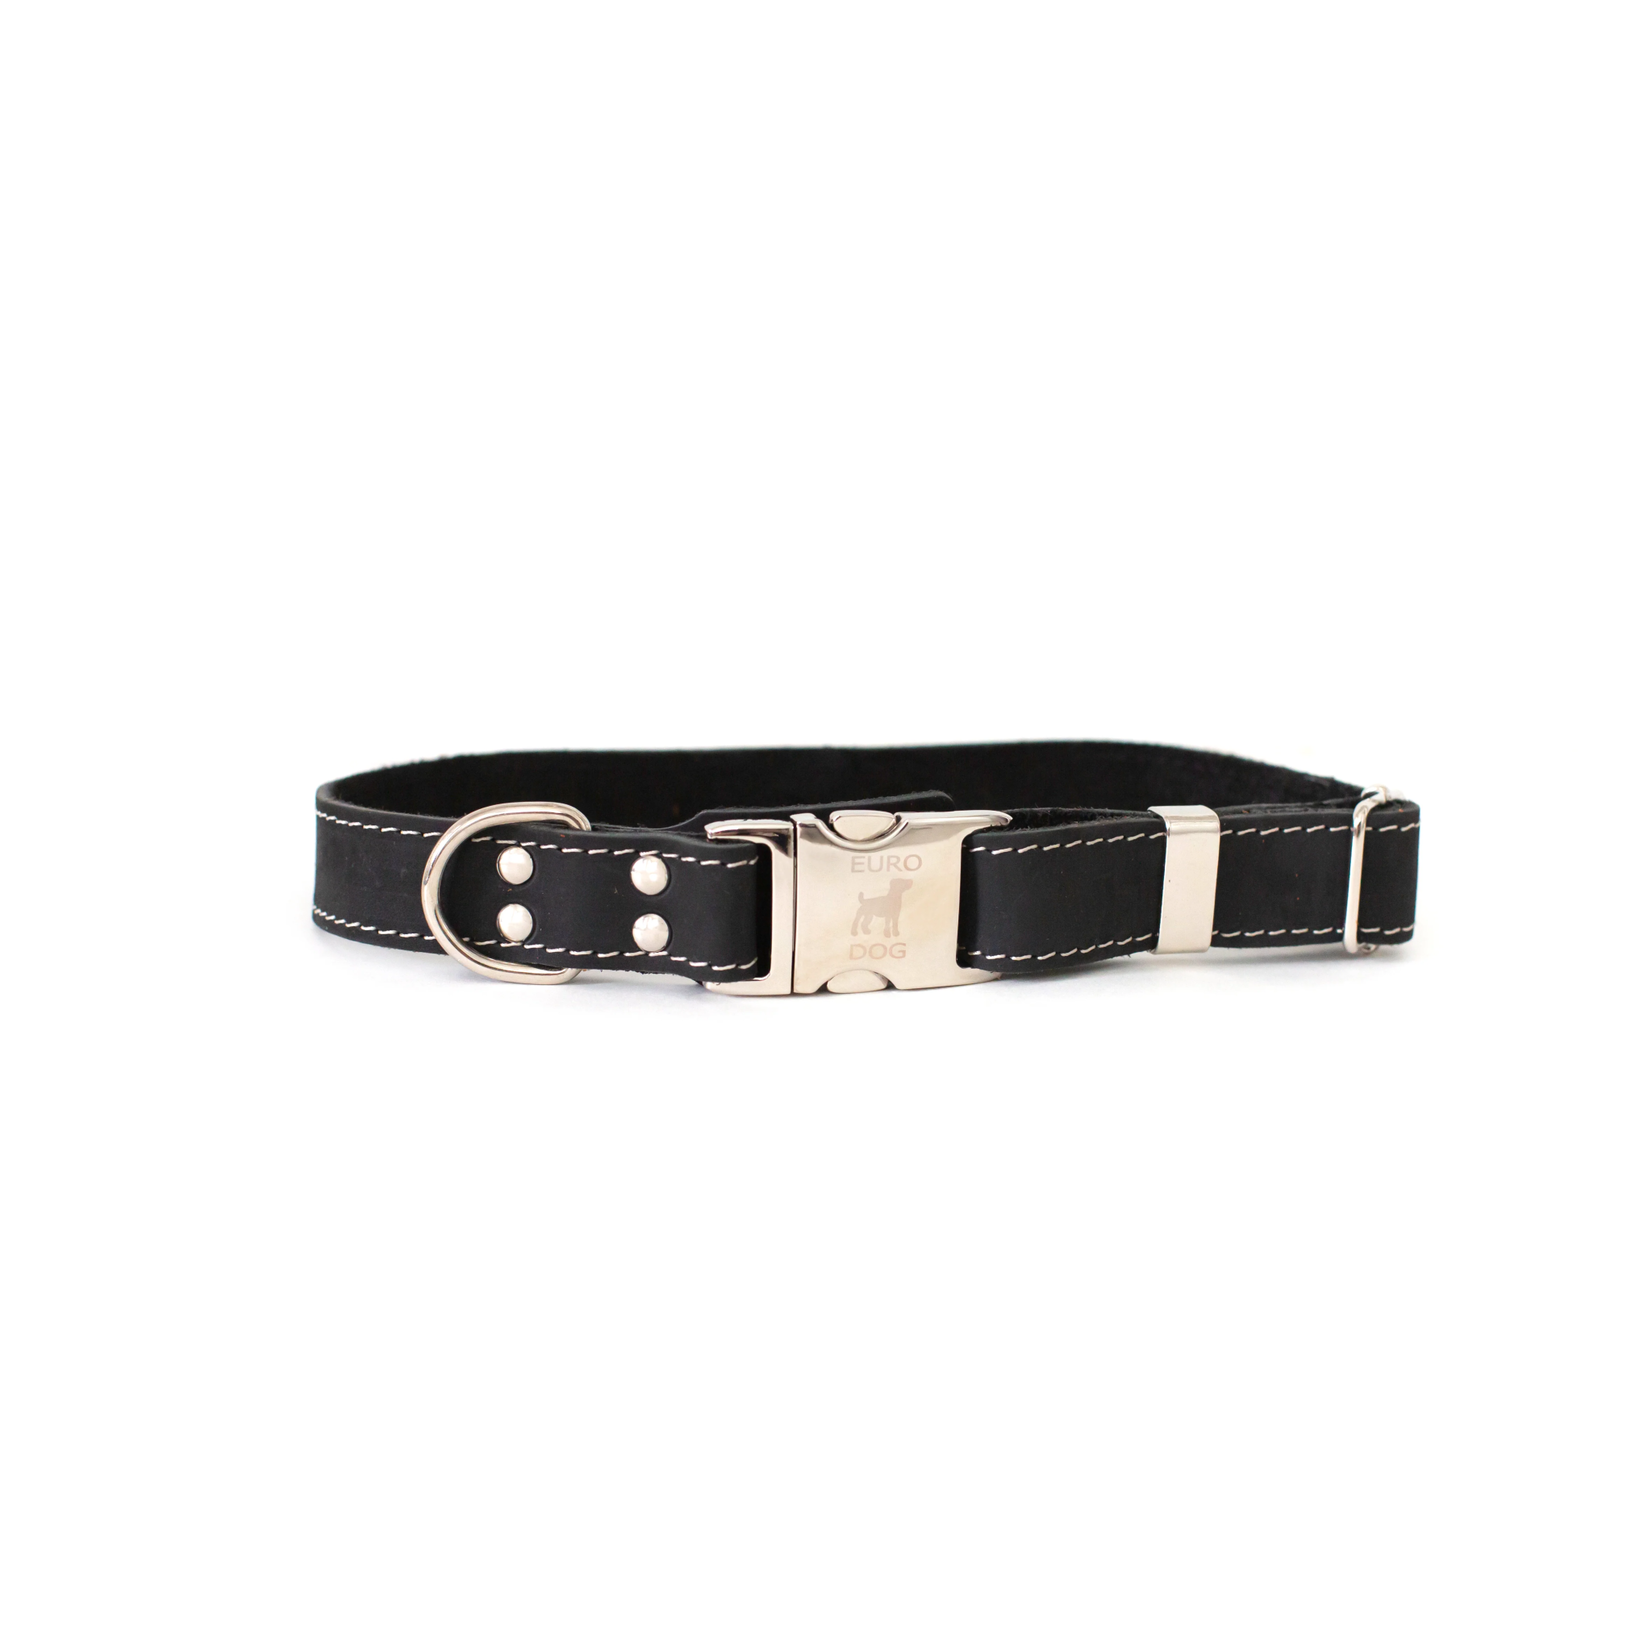 Euro Dog Euro Dog Collar Quick-Release Style Soft Leather